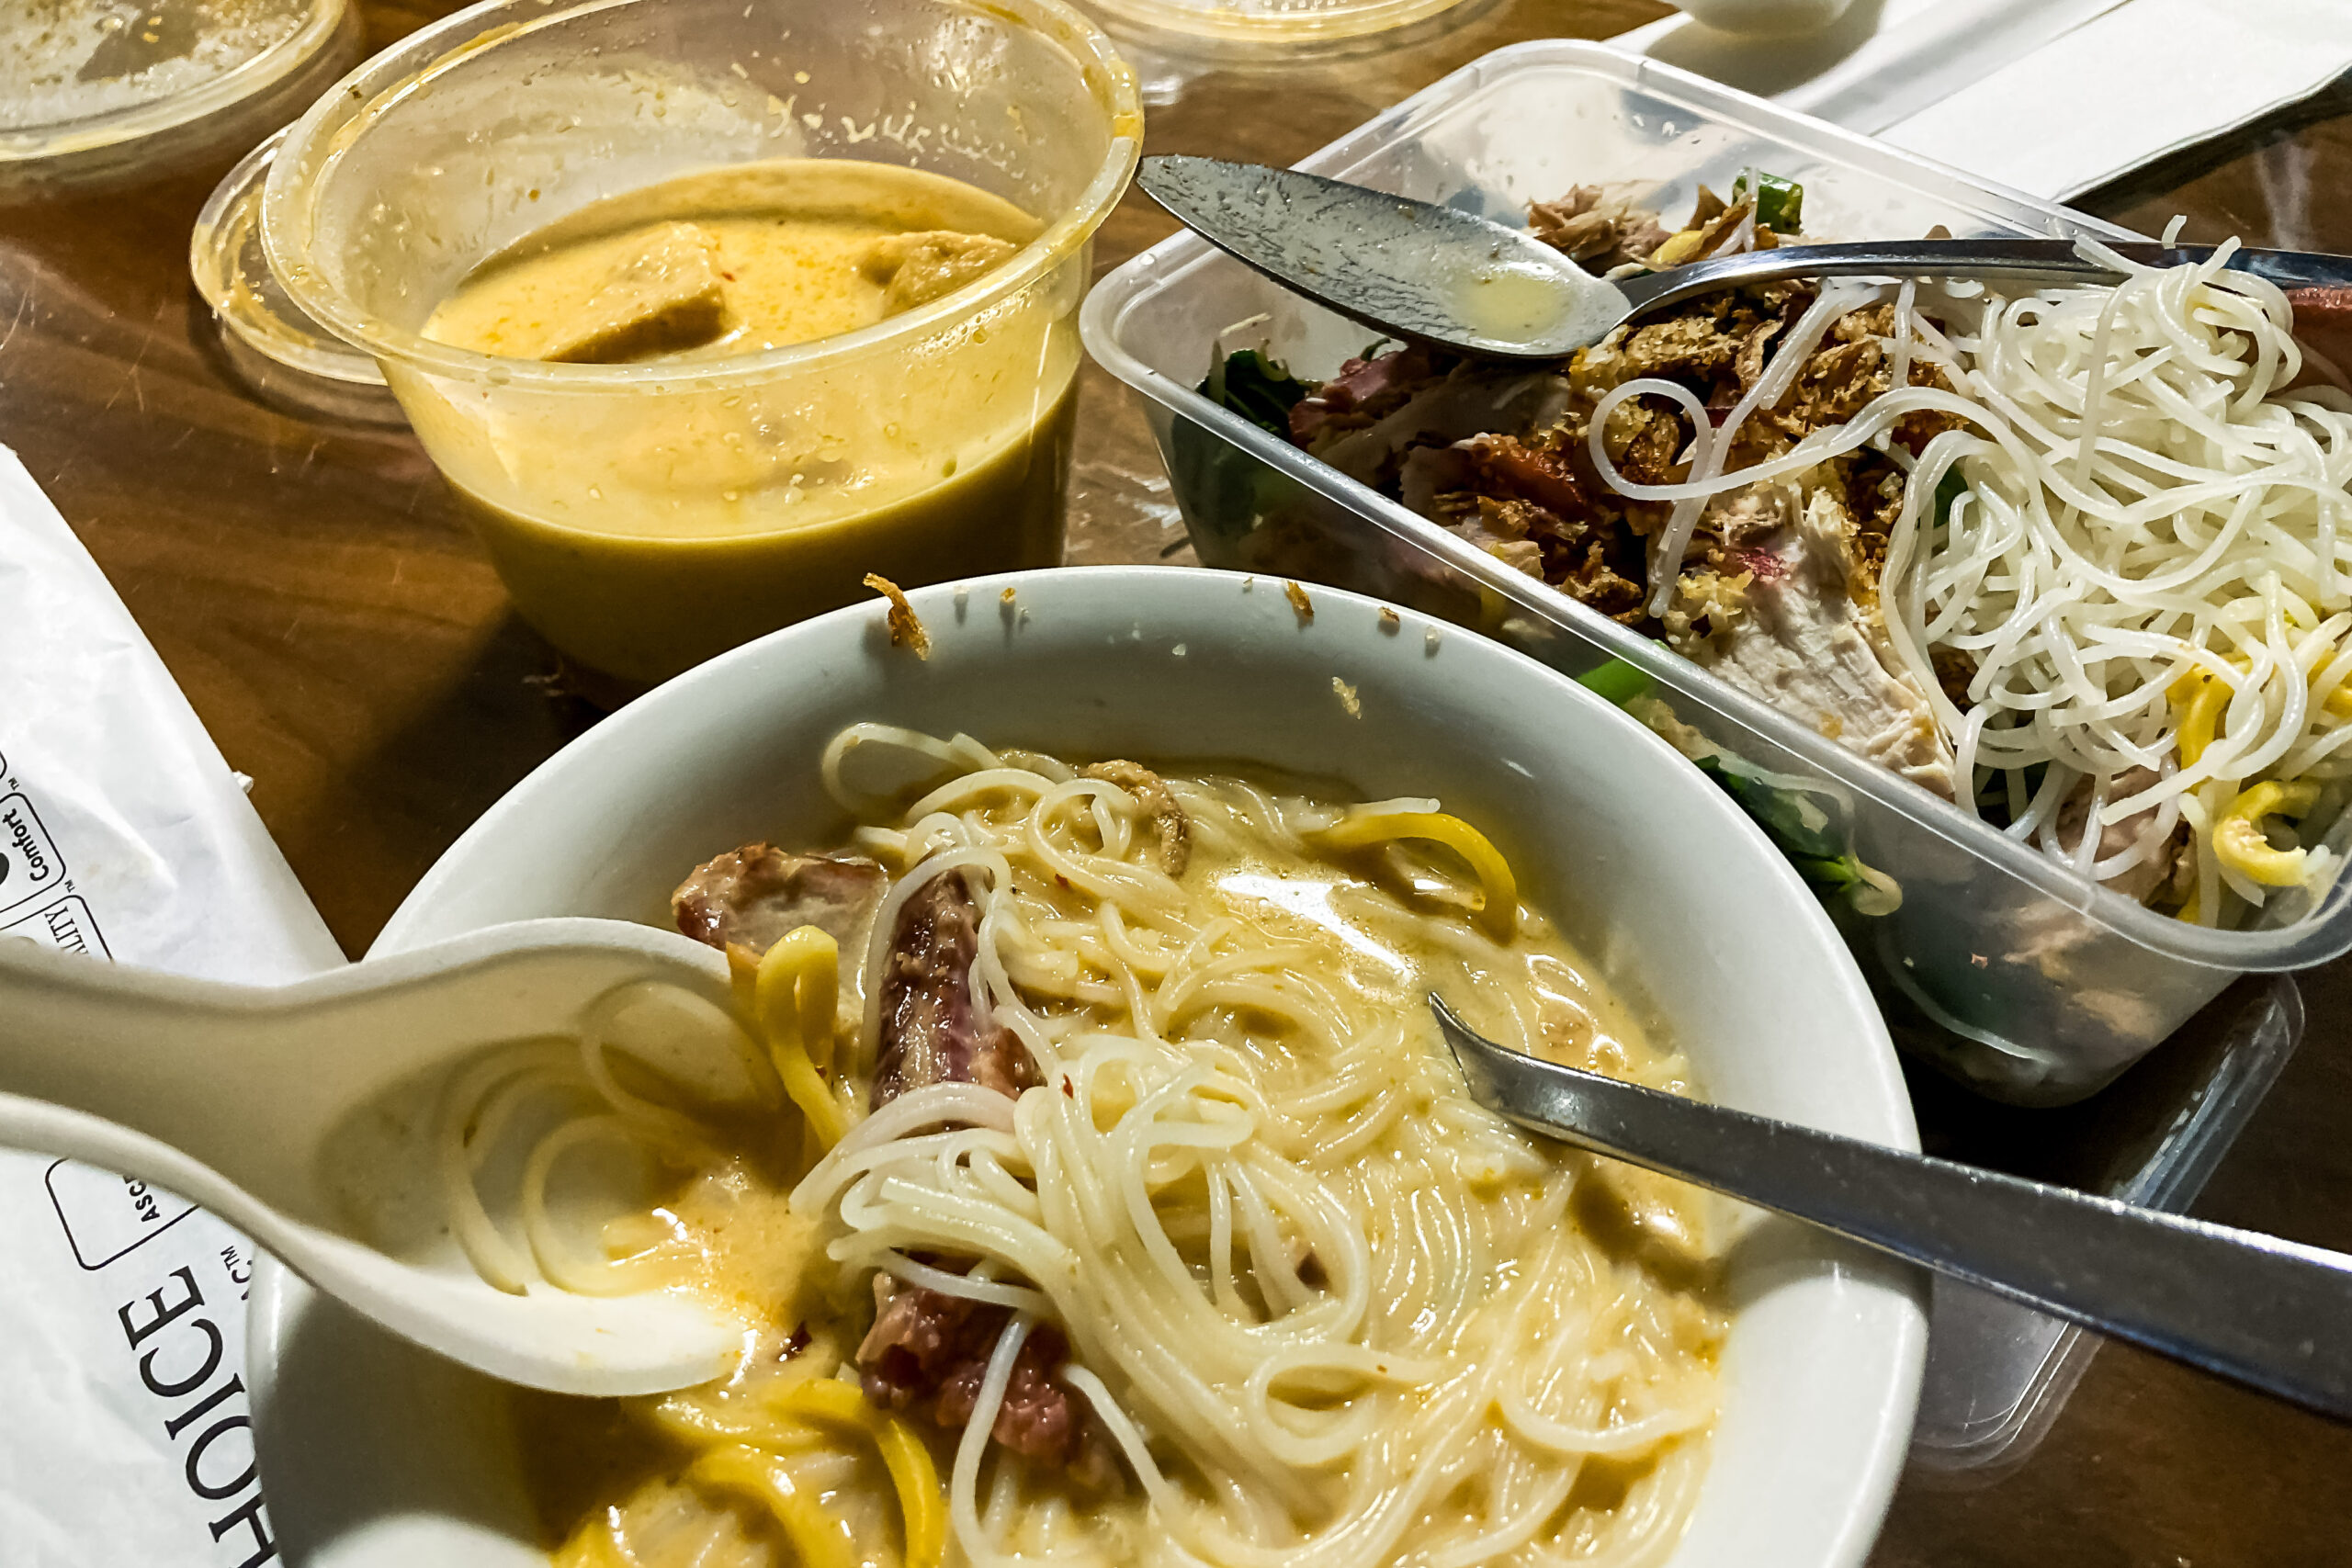 A bowl filled with noodles, and a round container with orange curry soup and an oblong container with more noodles and cooked meat